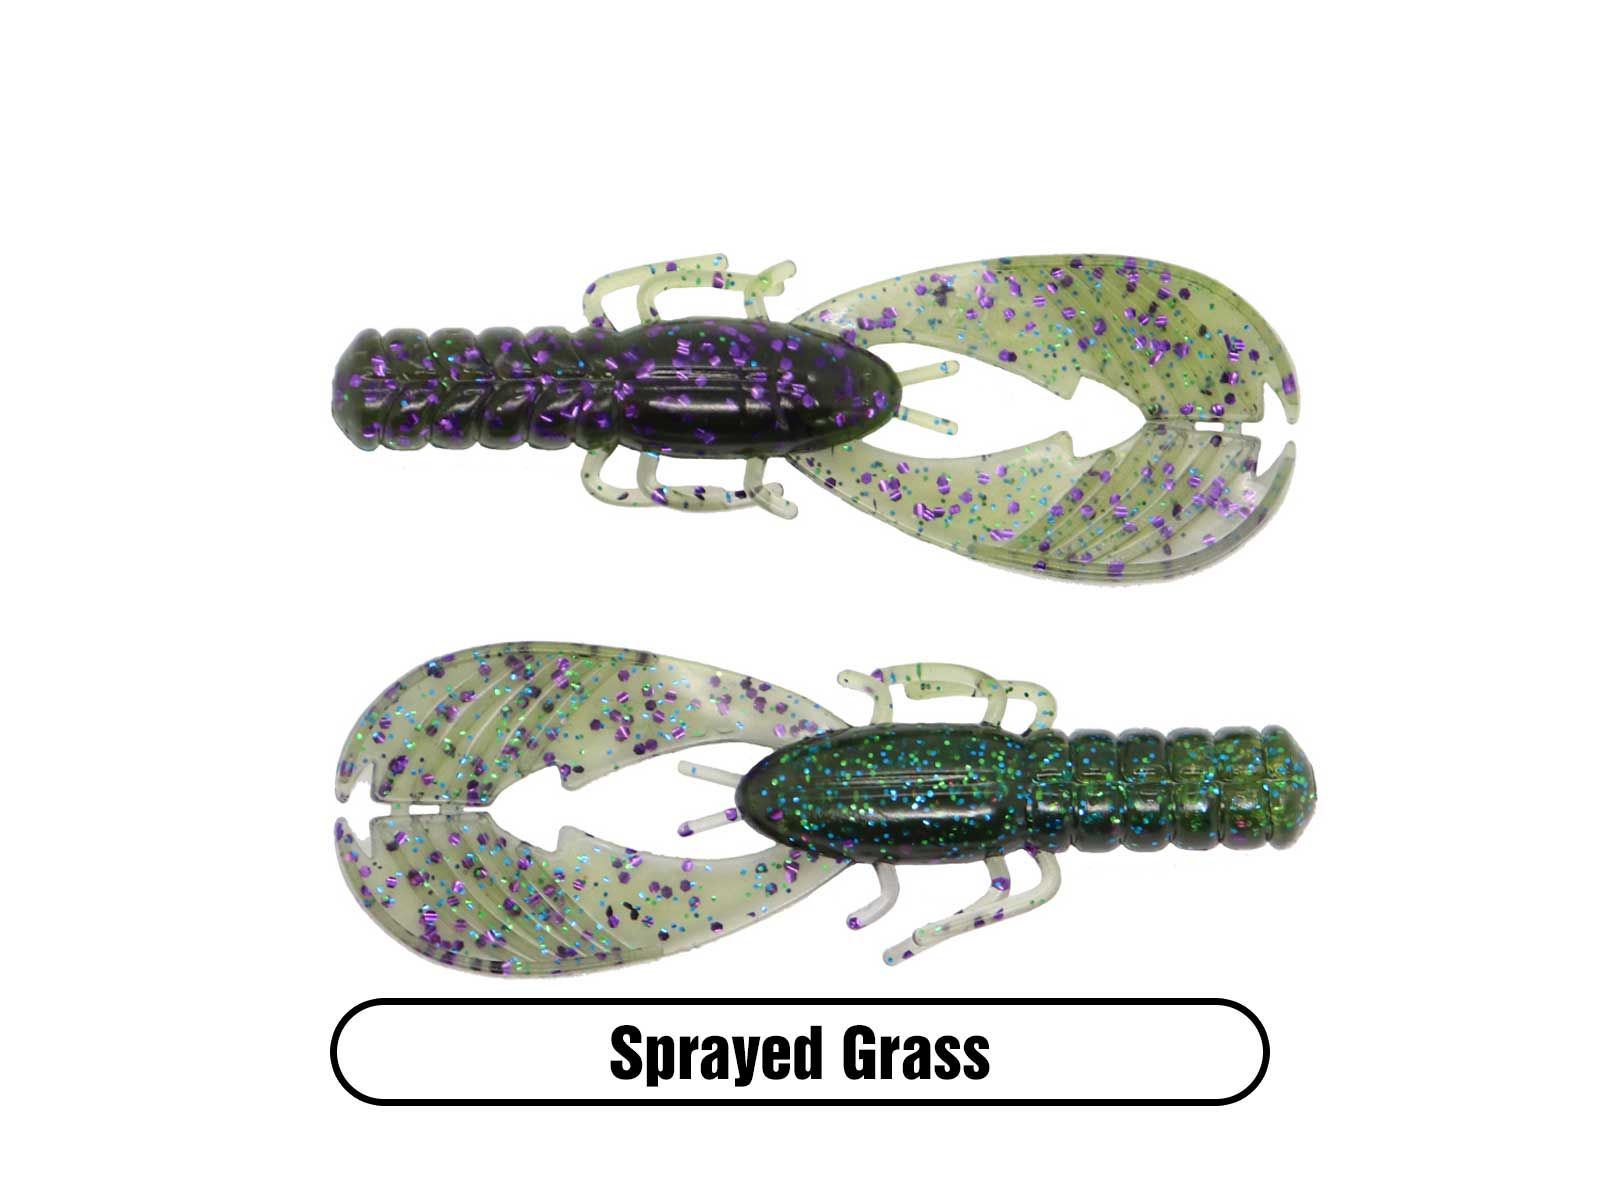 Soft Plastic Craw Bait for Largemouth Bass Fishing, Smallmouth Bass and Walleye Fishing Lure